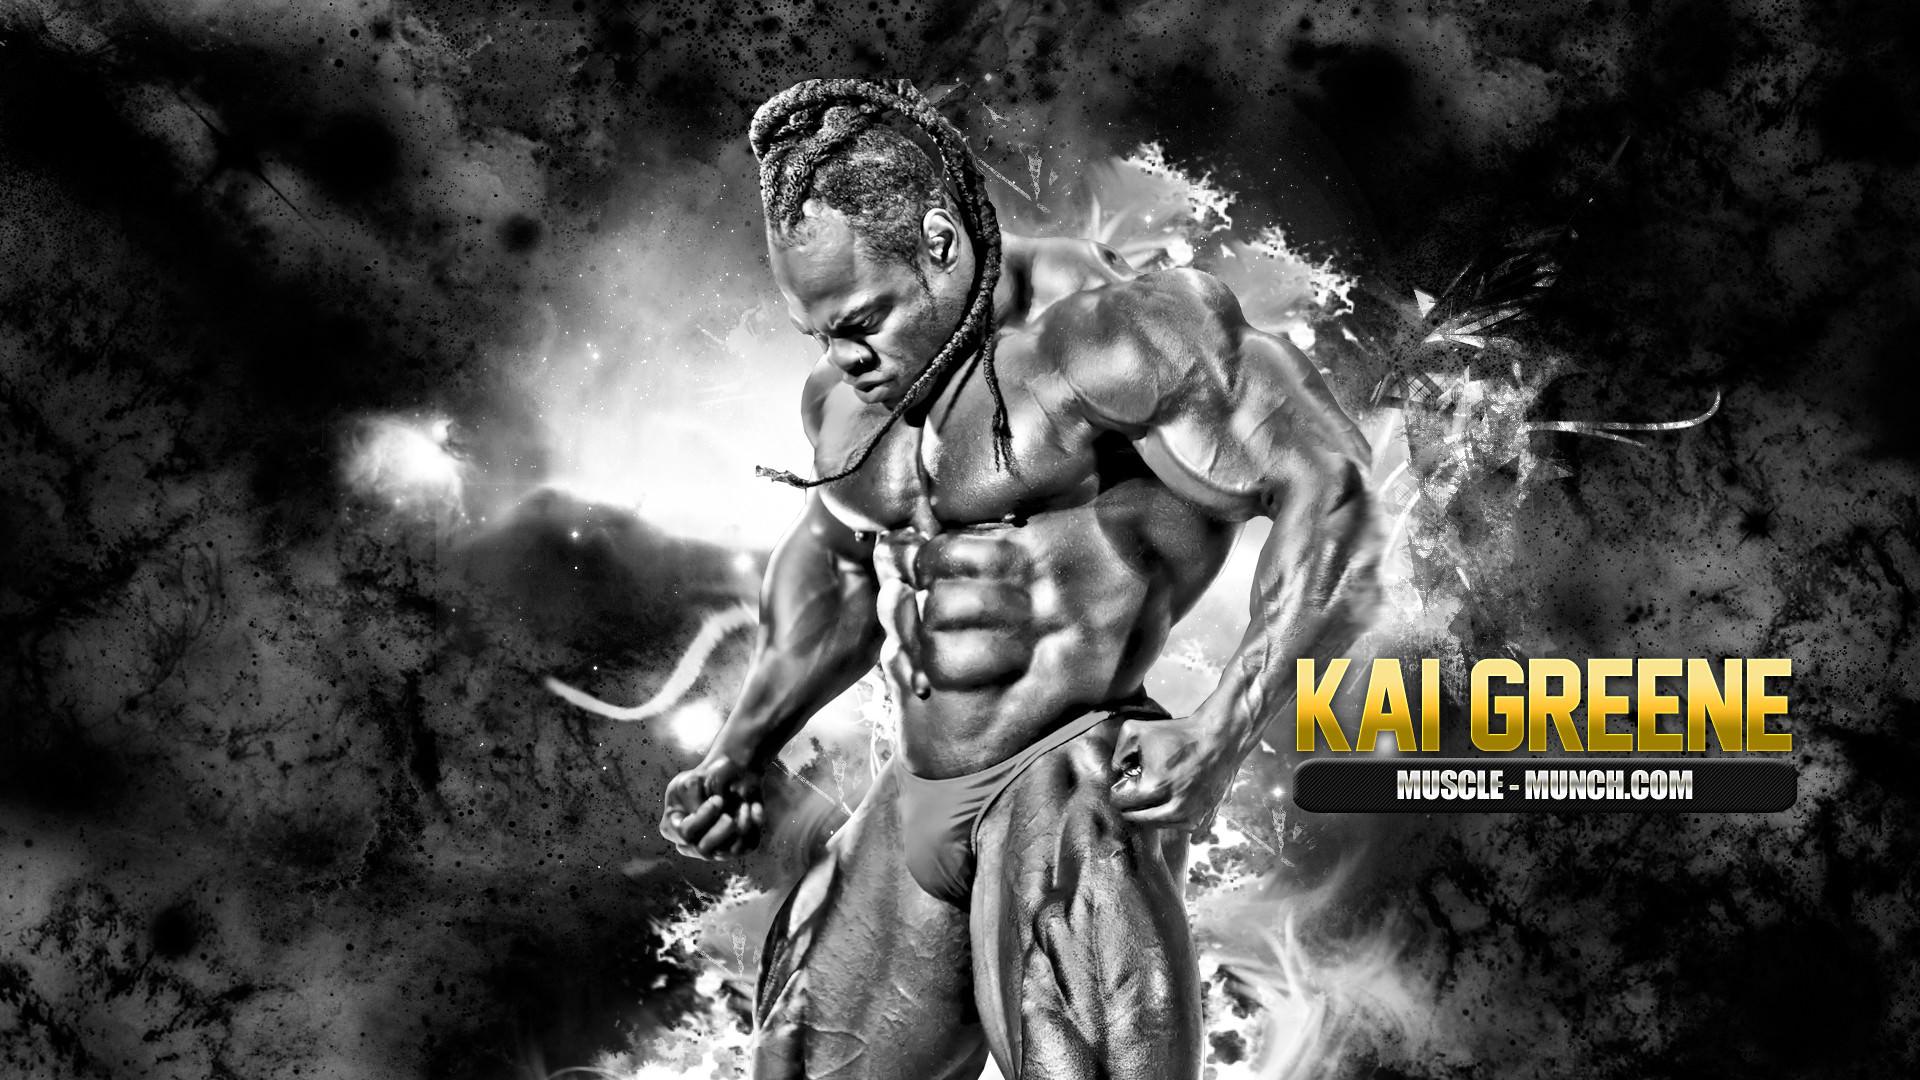 Kai Greene - This world is a warring wasteland. Beautiful, ancient temples  lie cracked and buried in the pestilent dirt. Once thriving civilizations,  these people have been massacred by a vengeful tyrant.